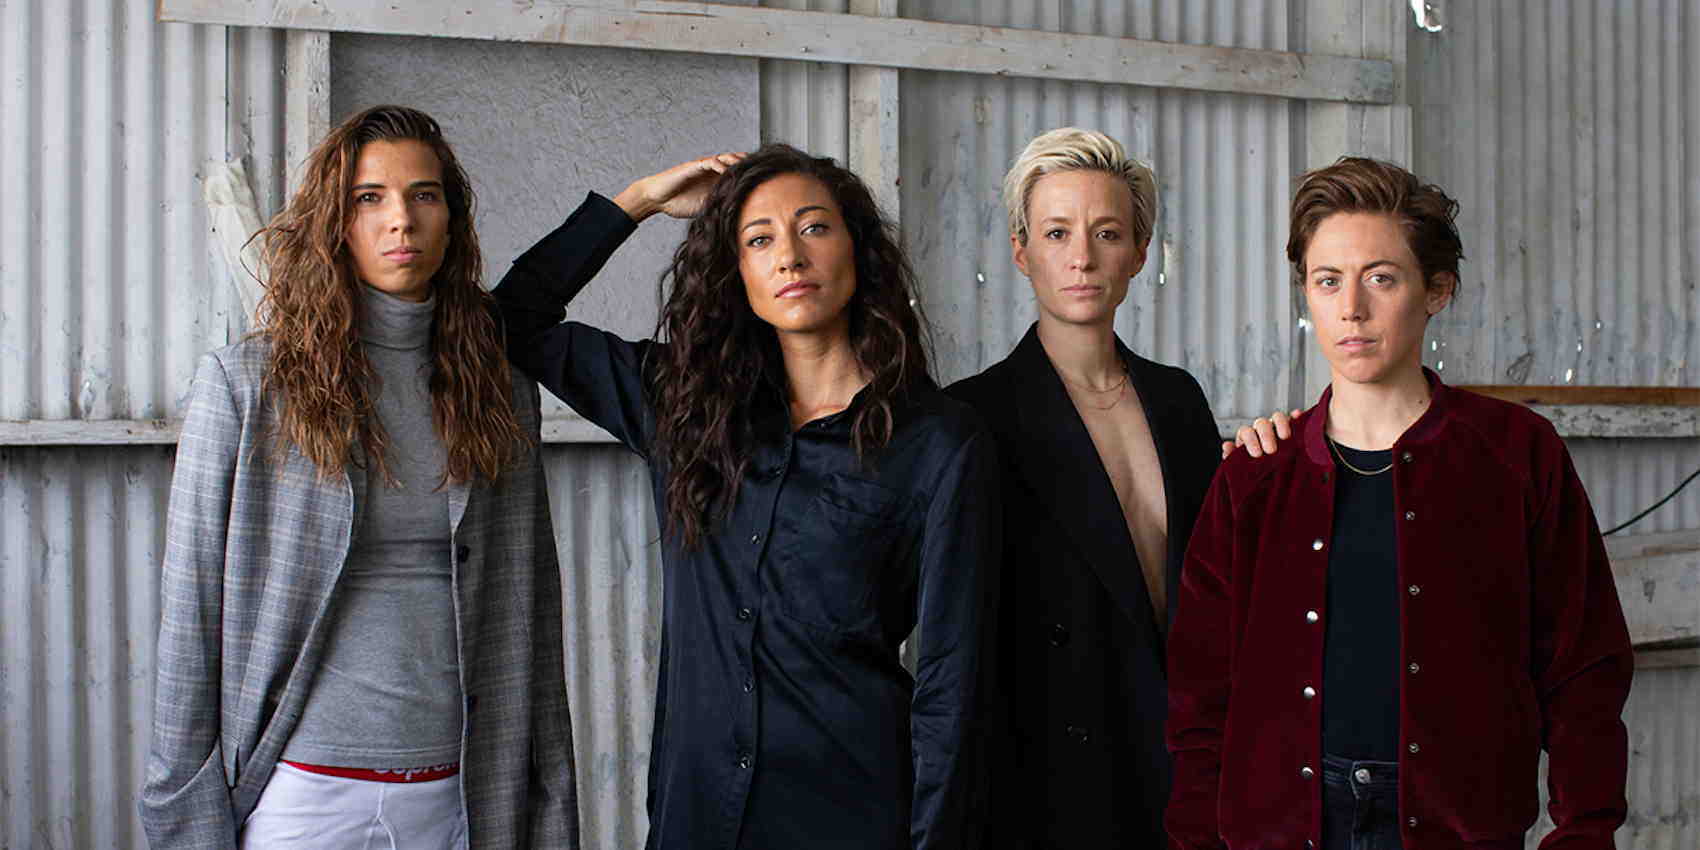 From World Cup Champions To Entrepreneurs: USWNT Stars Tobin Heath, Christen Press Lead The Pack